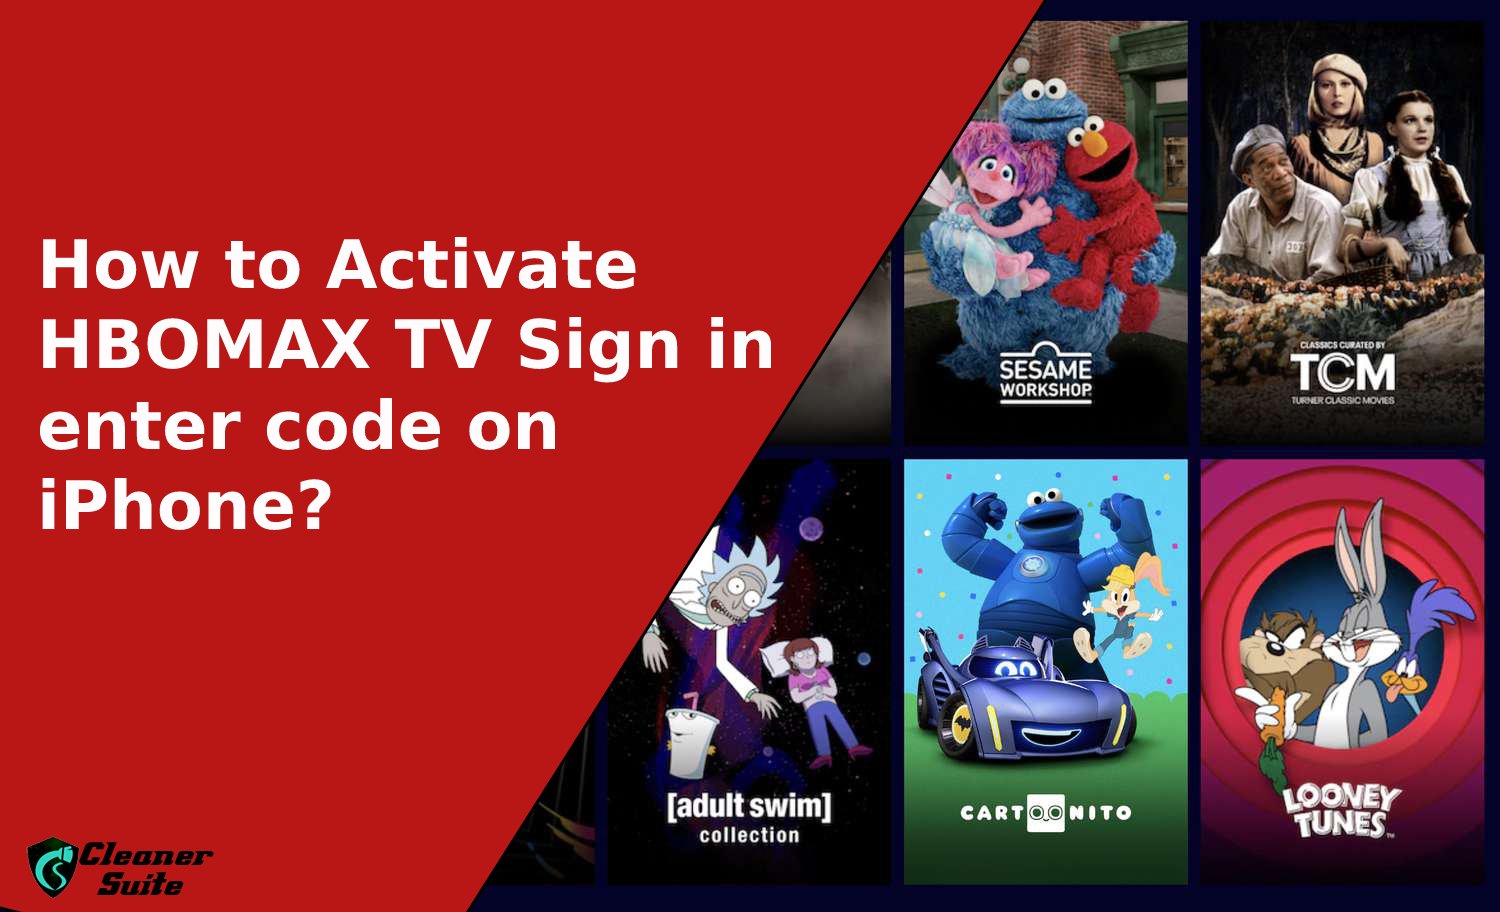 How to Activate HBOMAX TV Sign in enter code on iPhone